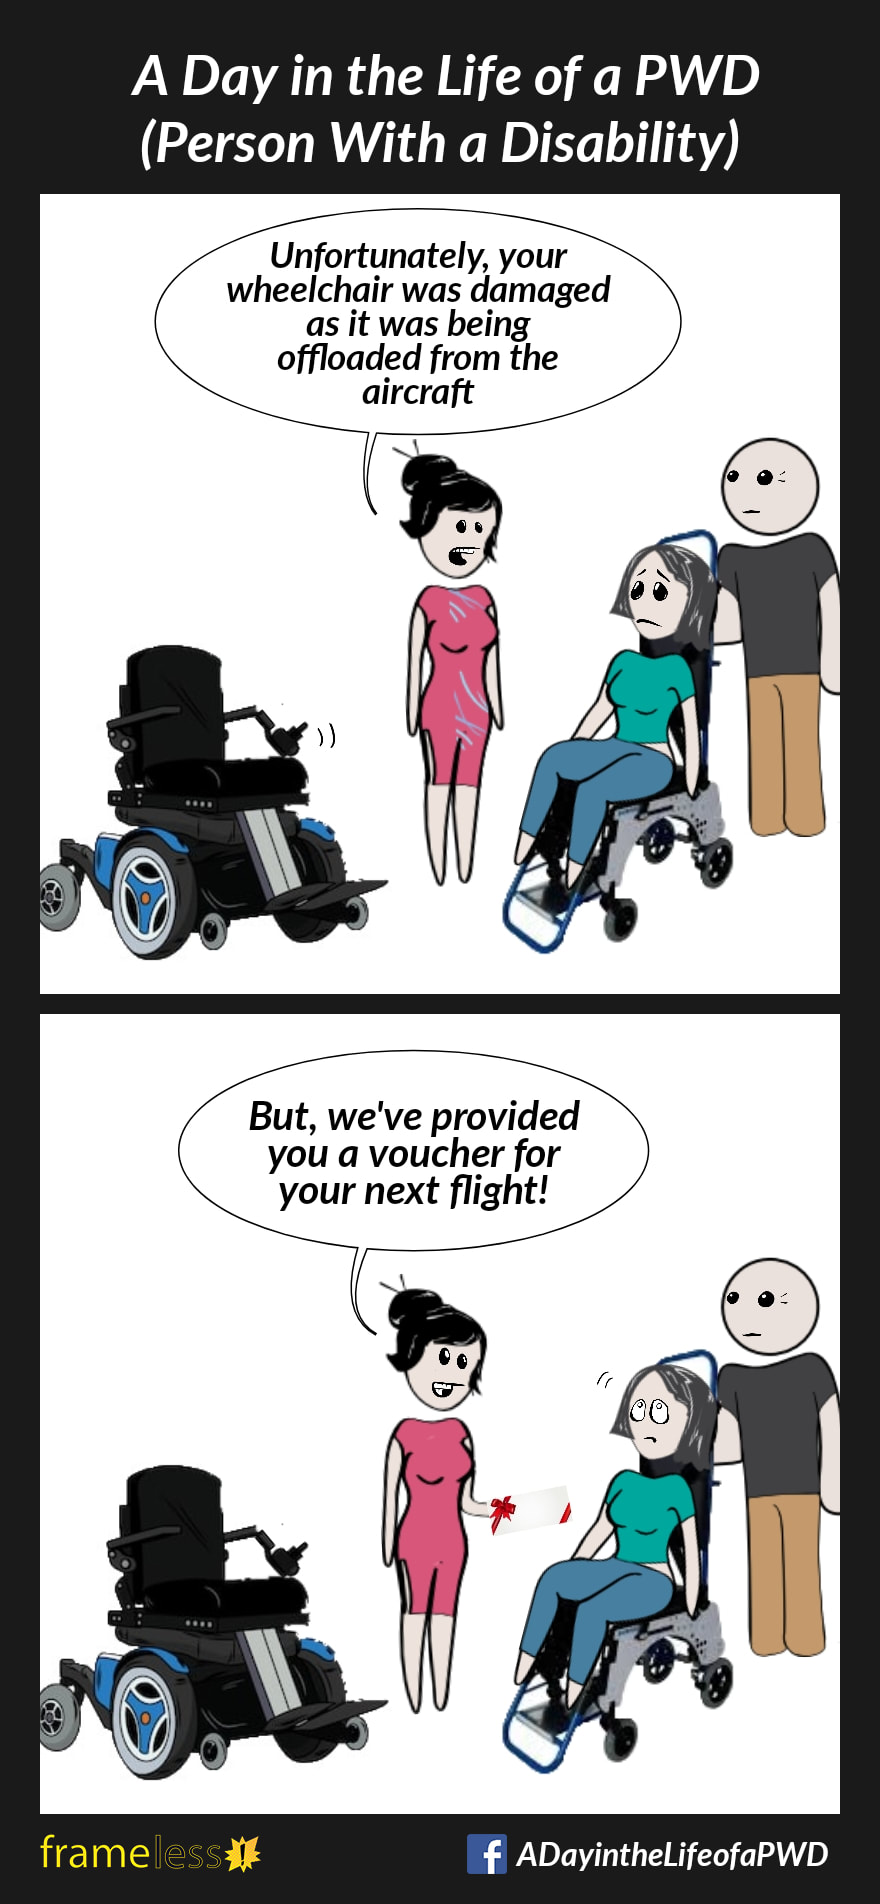 COMIC STRIP 
A Day in the Life of a PWD (Person With a Disability) 

Frame 1:
A woman is sitting in a transport wheelchair at the airport, talking to a service agent. The controller on her power wheelchair is broken.
AGENT: Unfortunately, your wheelchair was damaged as it was being offloaded from the aircraft.

Frame 2:
AGENT: But we've provided your a voucher for your next flight!
The woman rolls her eyes.